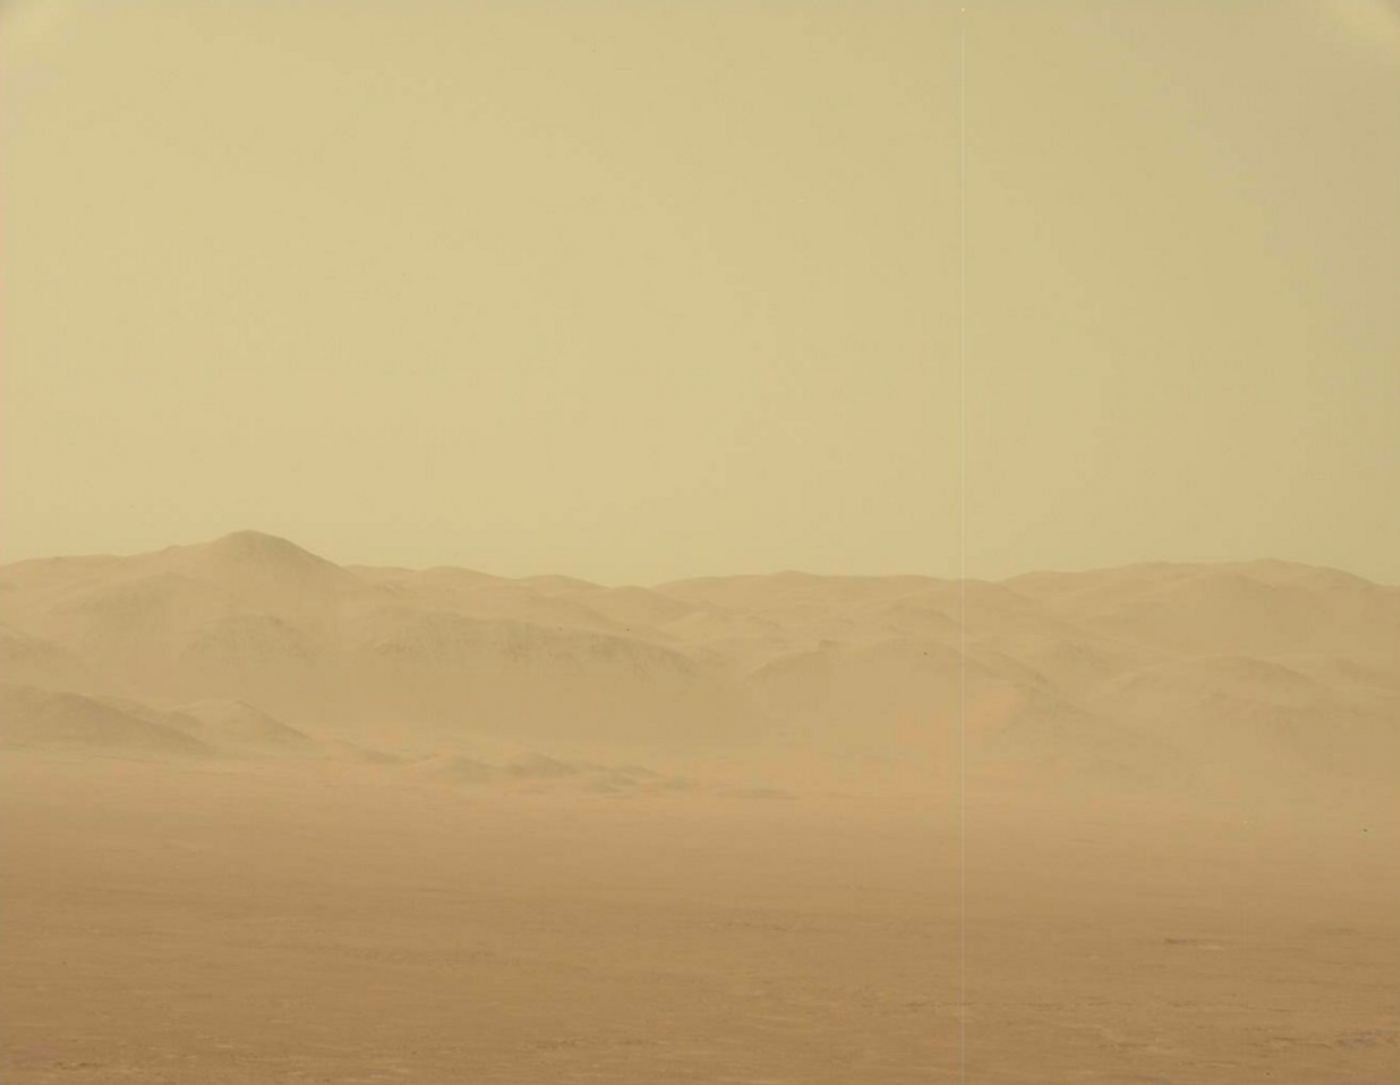 A view of the Martian dust storm from the Curiosity rover's mast camera.